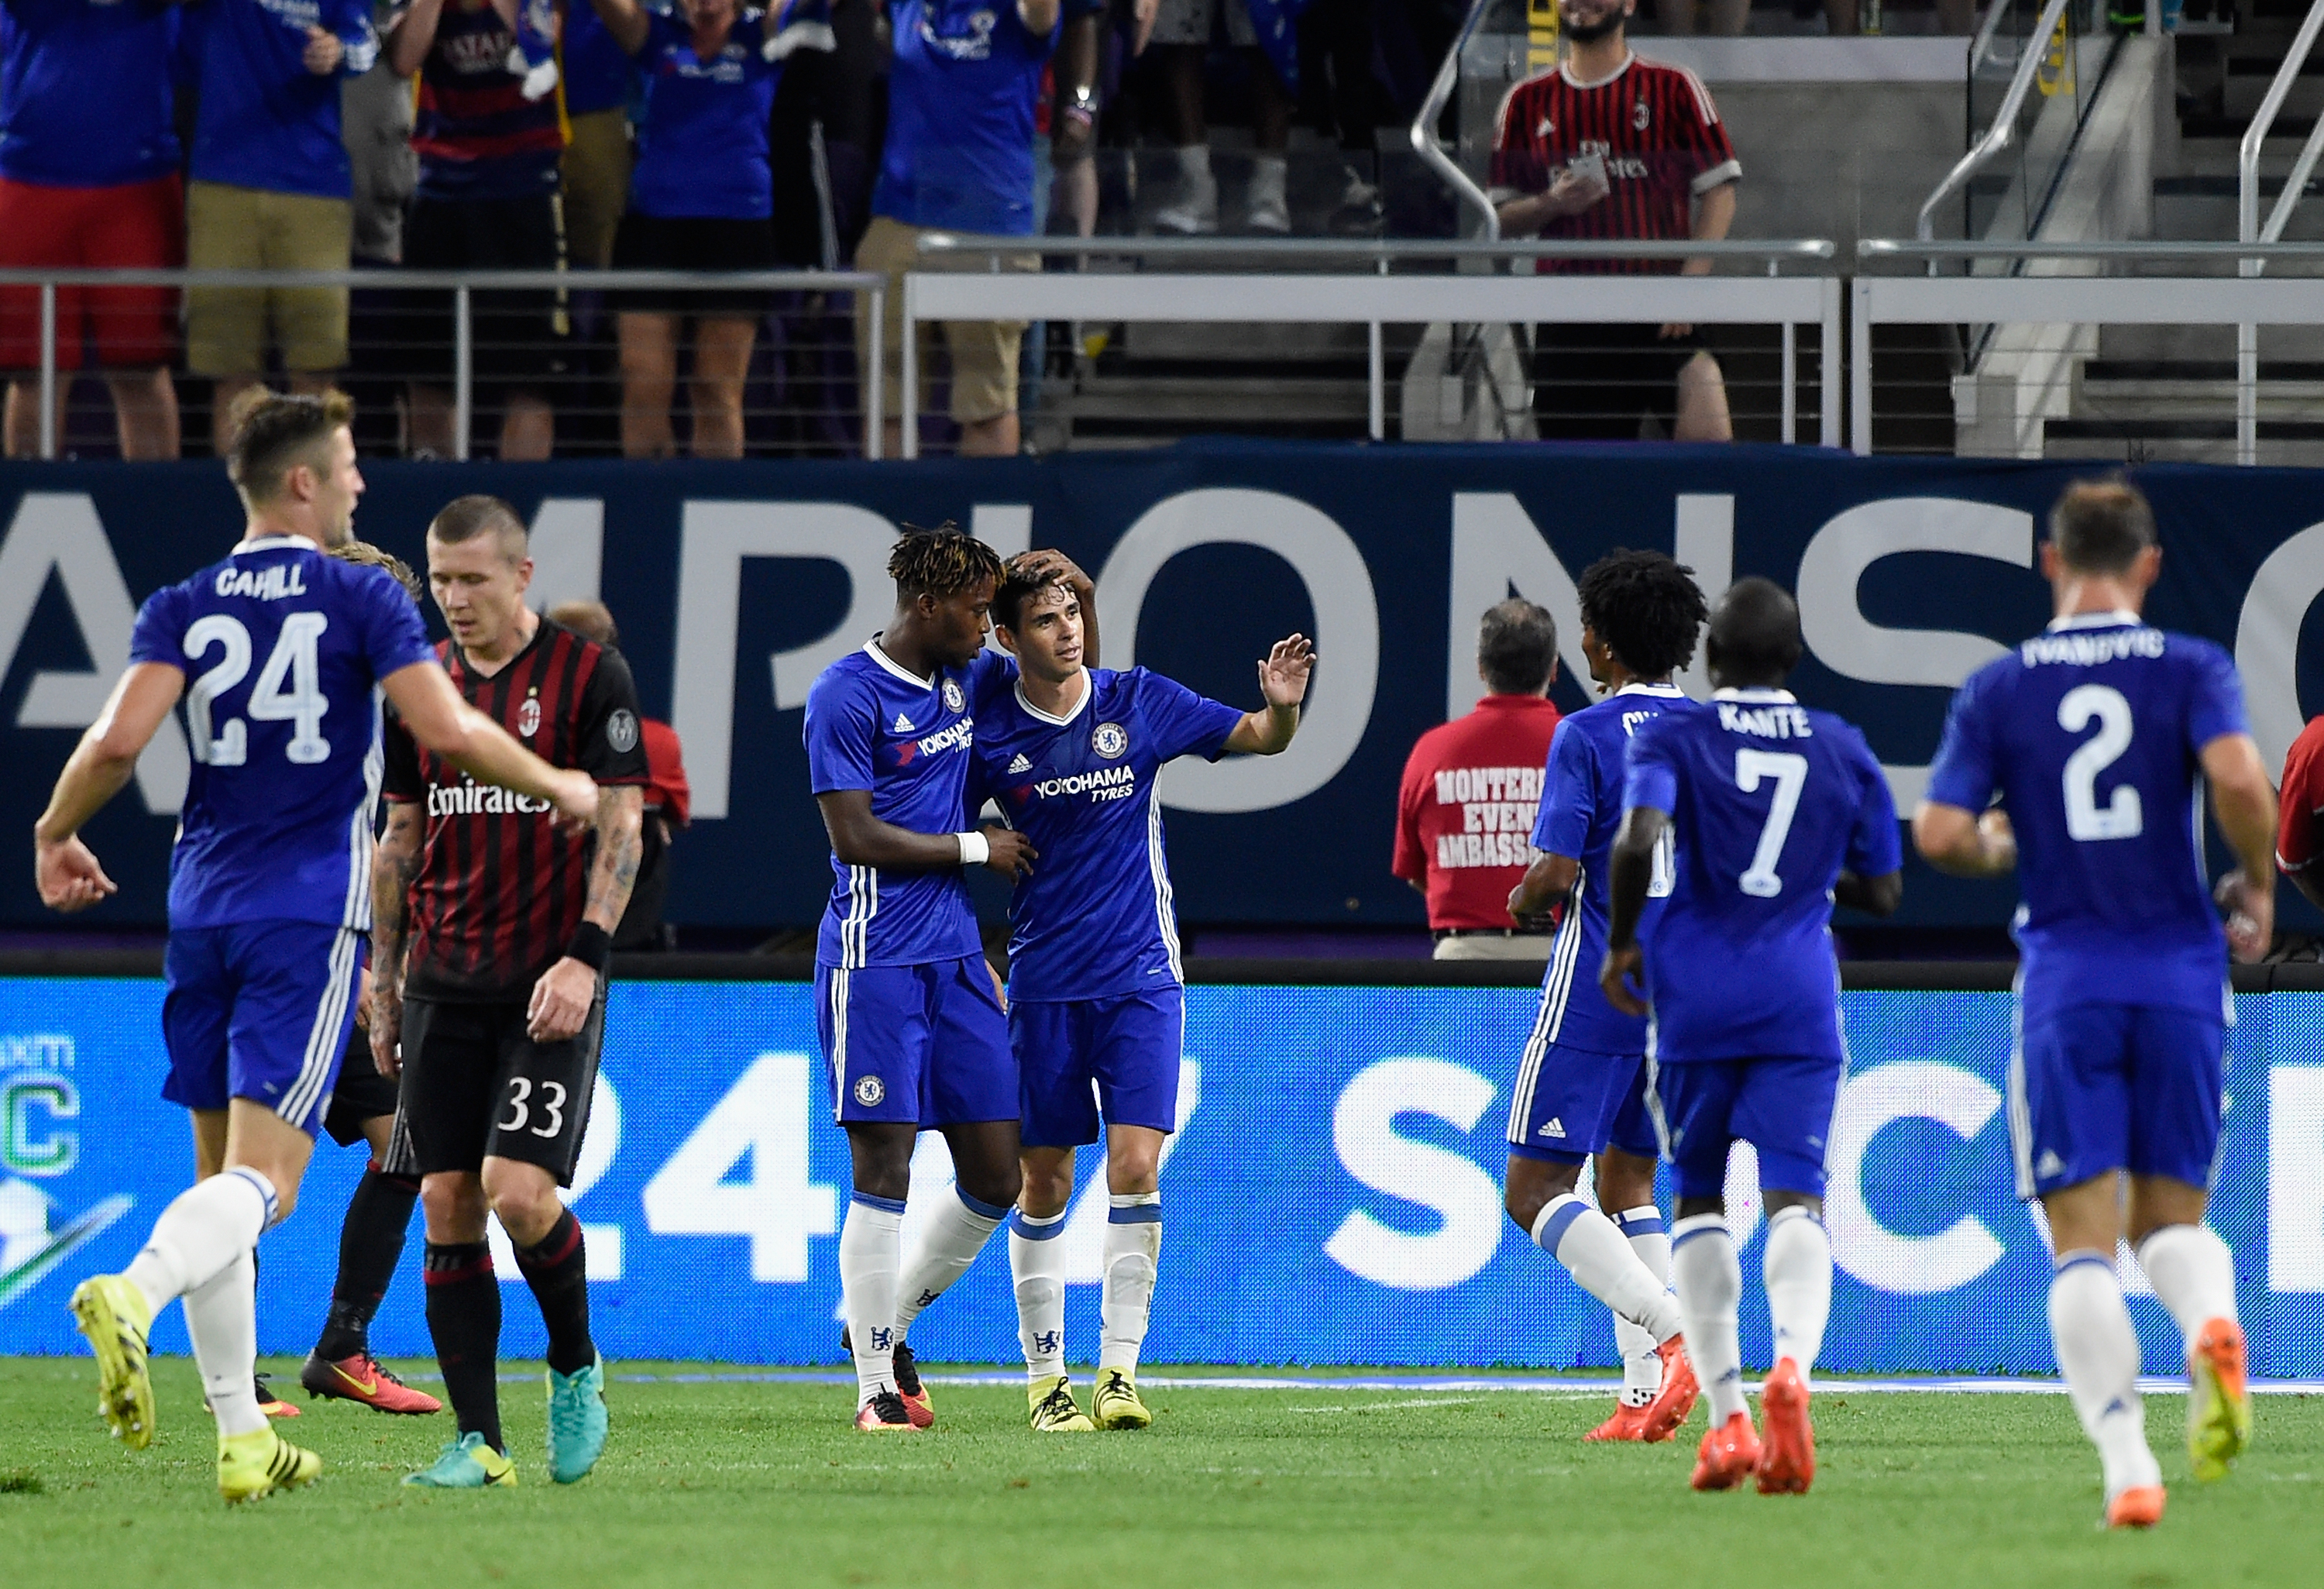 MINNEAPOLIS, MN - AUGUST 3: Chelsea celebrates a goal by Oscar #8 as Juraj Kucka #33 of AC Milan looks on during the second half of the International Champions Cup match on August 3, 2016 at U.S. Bank Stadium in Minneapolis, Minnesota. Chelsea defeat AC Milan 3-1. (Photo by Hannah Foslien/Getty Images)